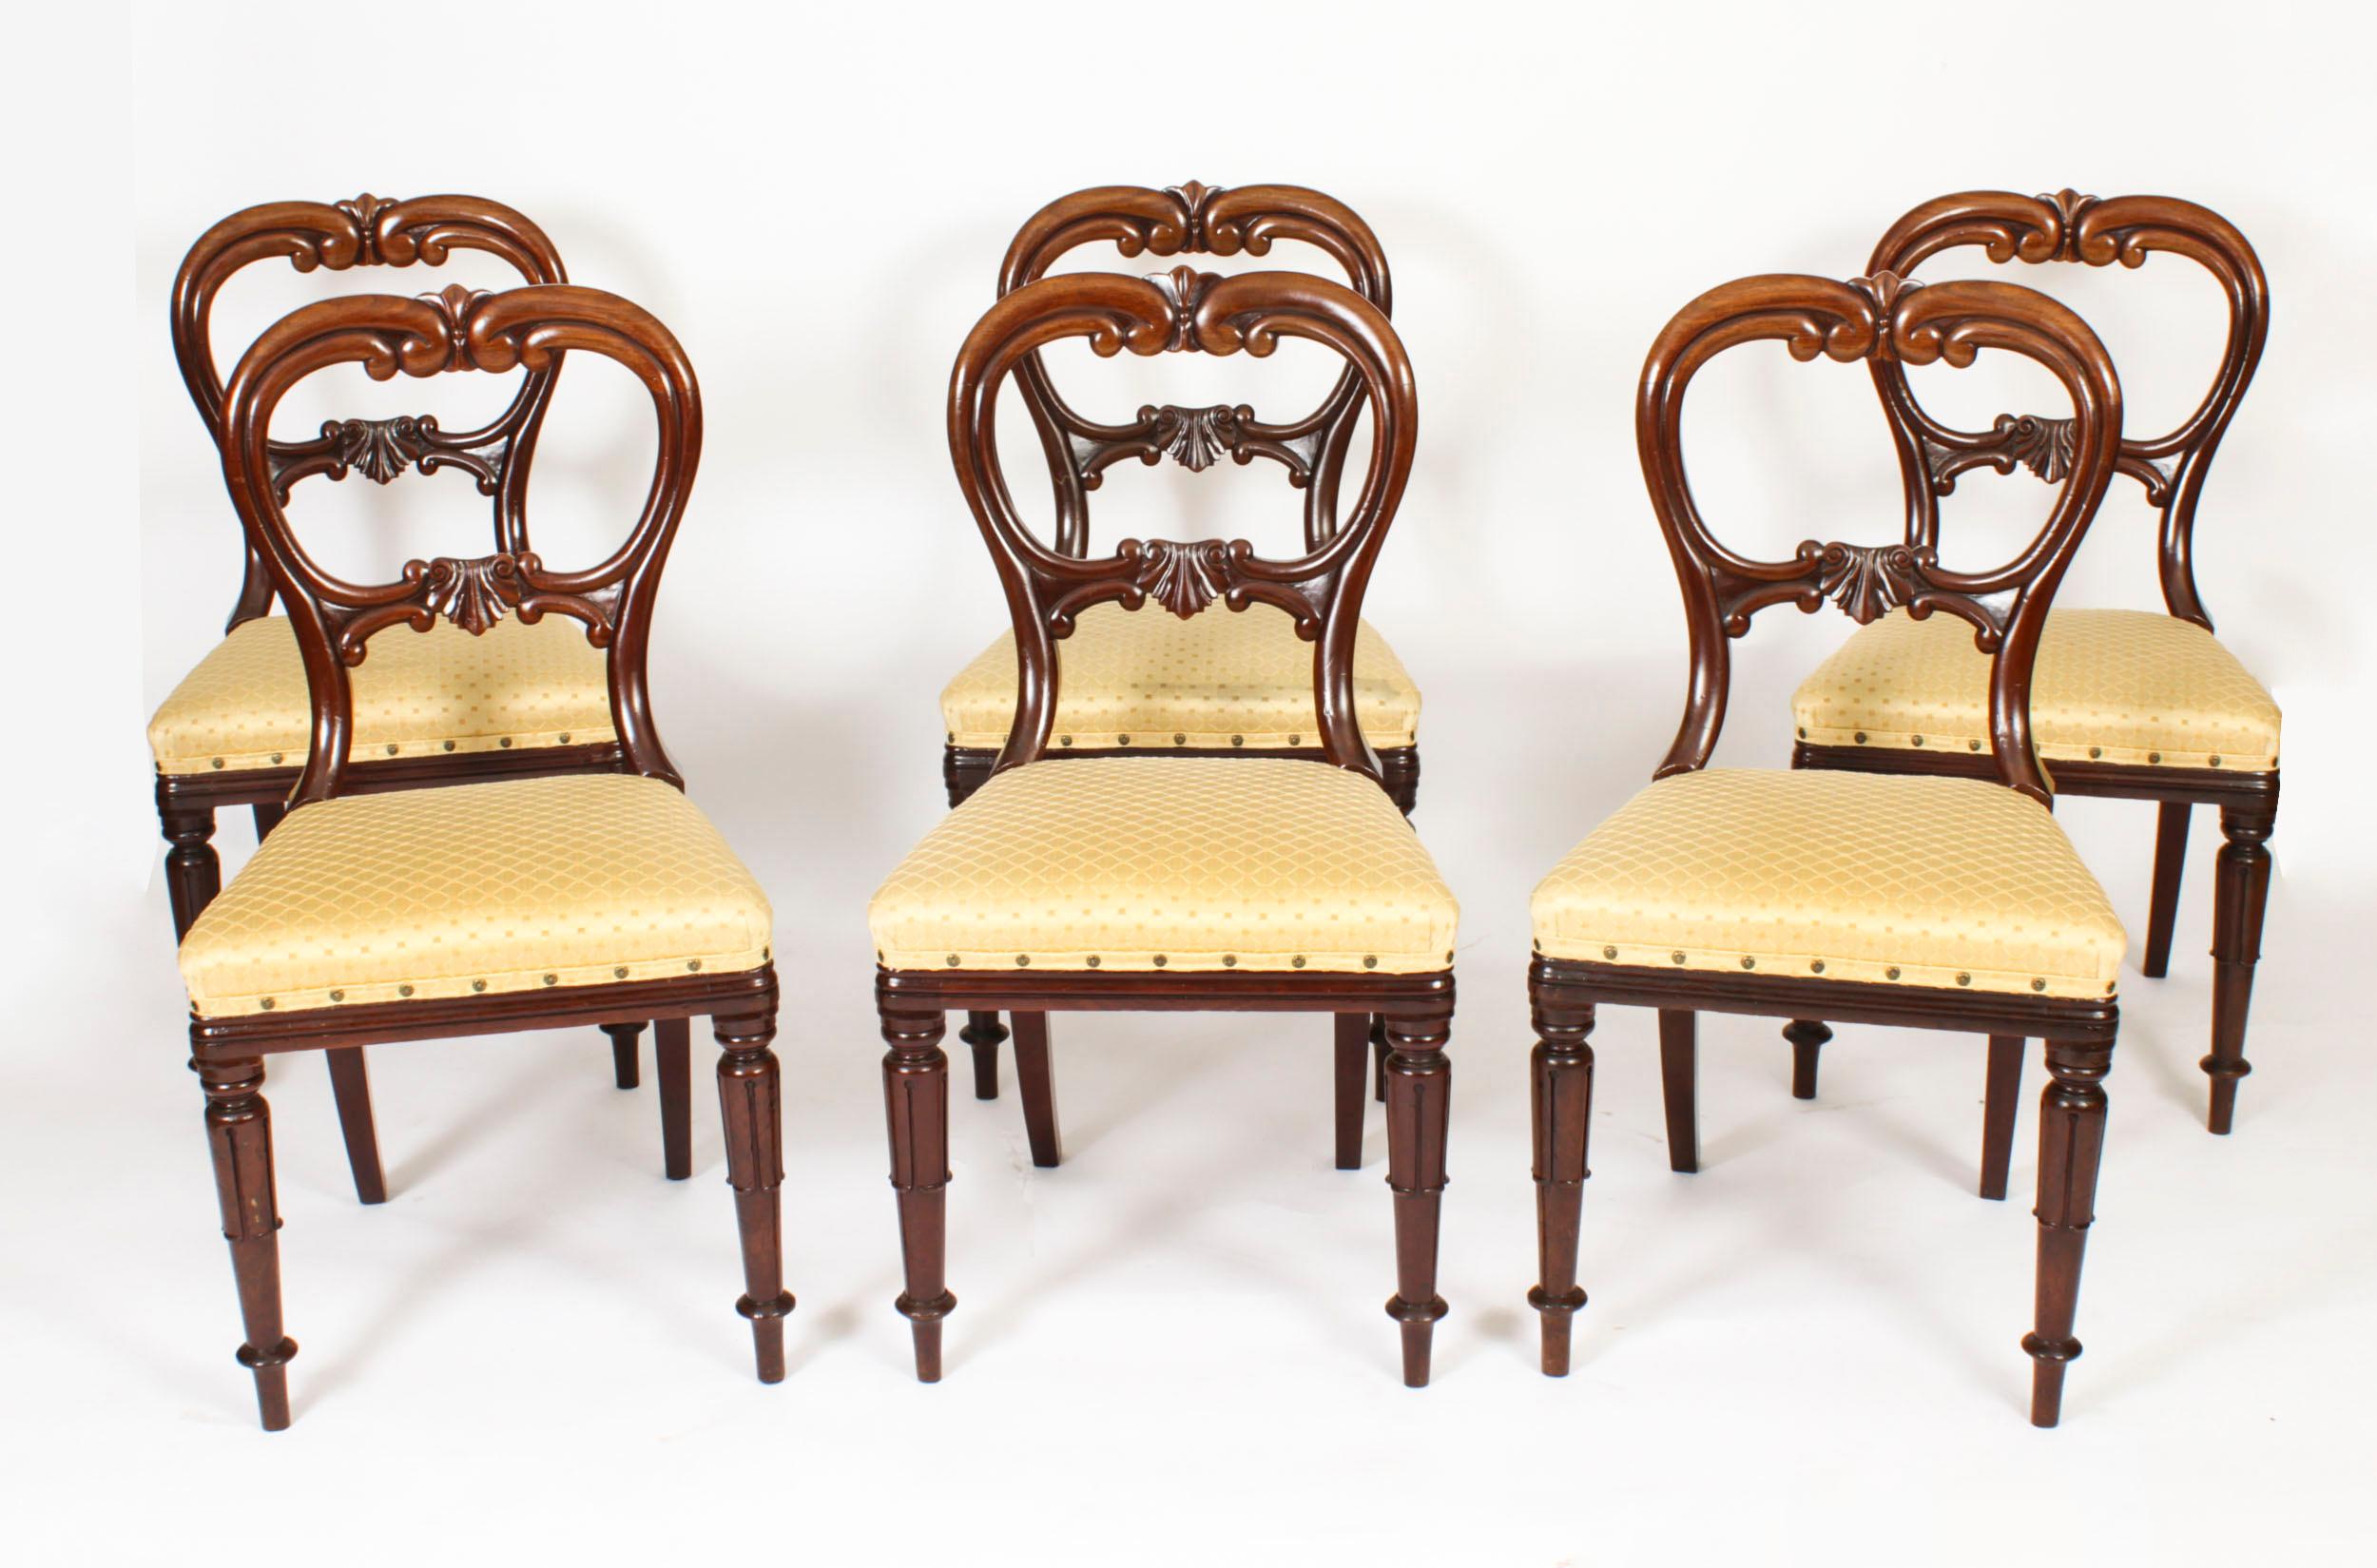 This is a beautiful set of six English antique Wiliam IV flame mahogany dining chairs, circa 1830 in date.

They have striking carved top and mid rails that feature decrative C scrolls and anthemion. The upholstered gold patterned silk over stuffed